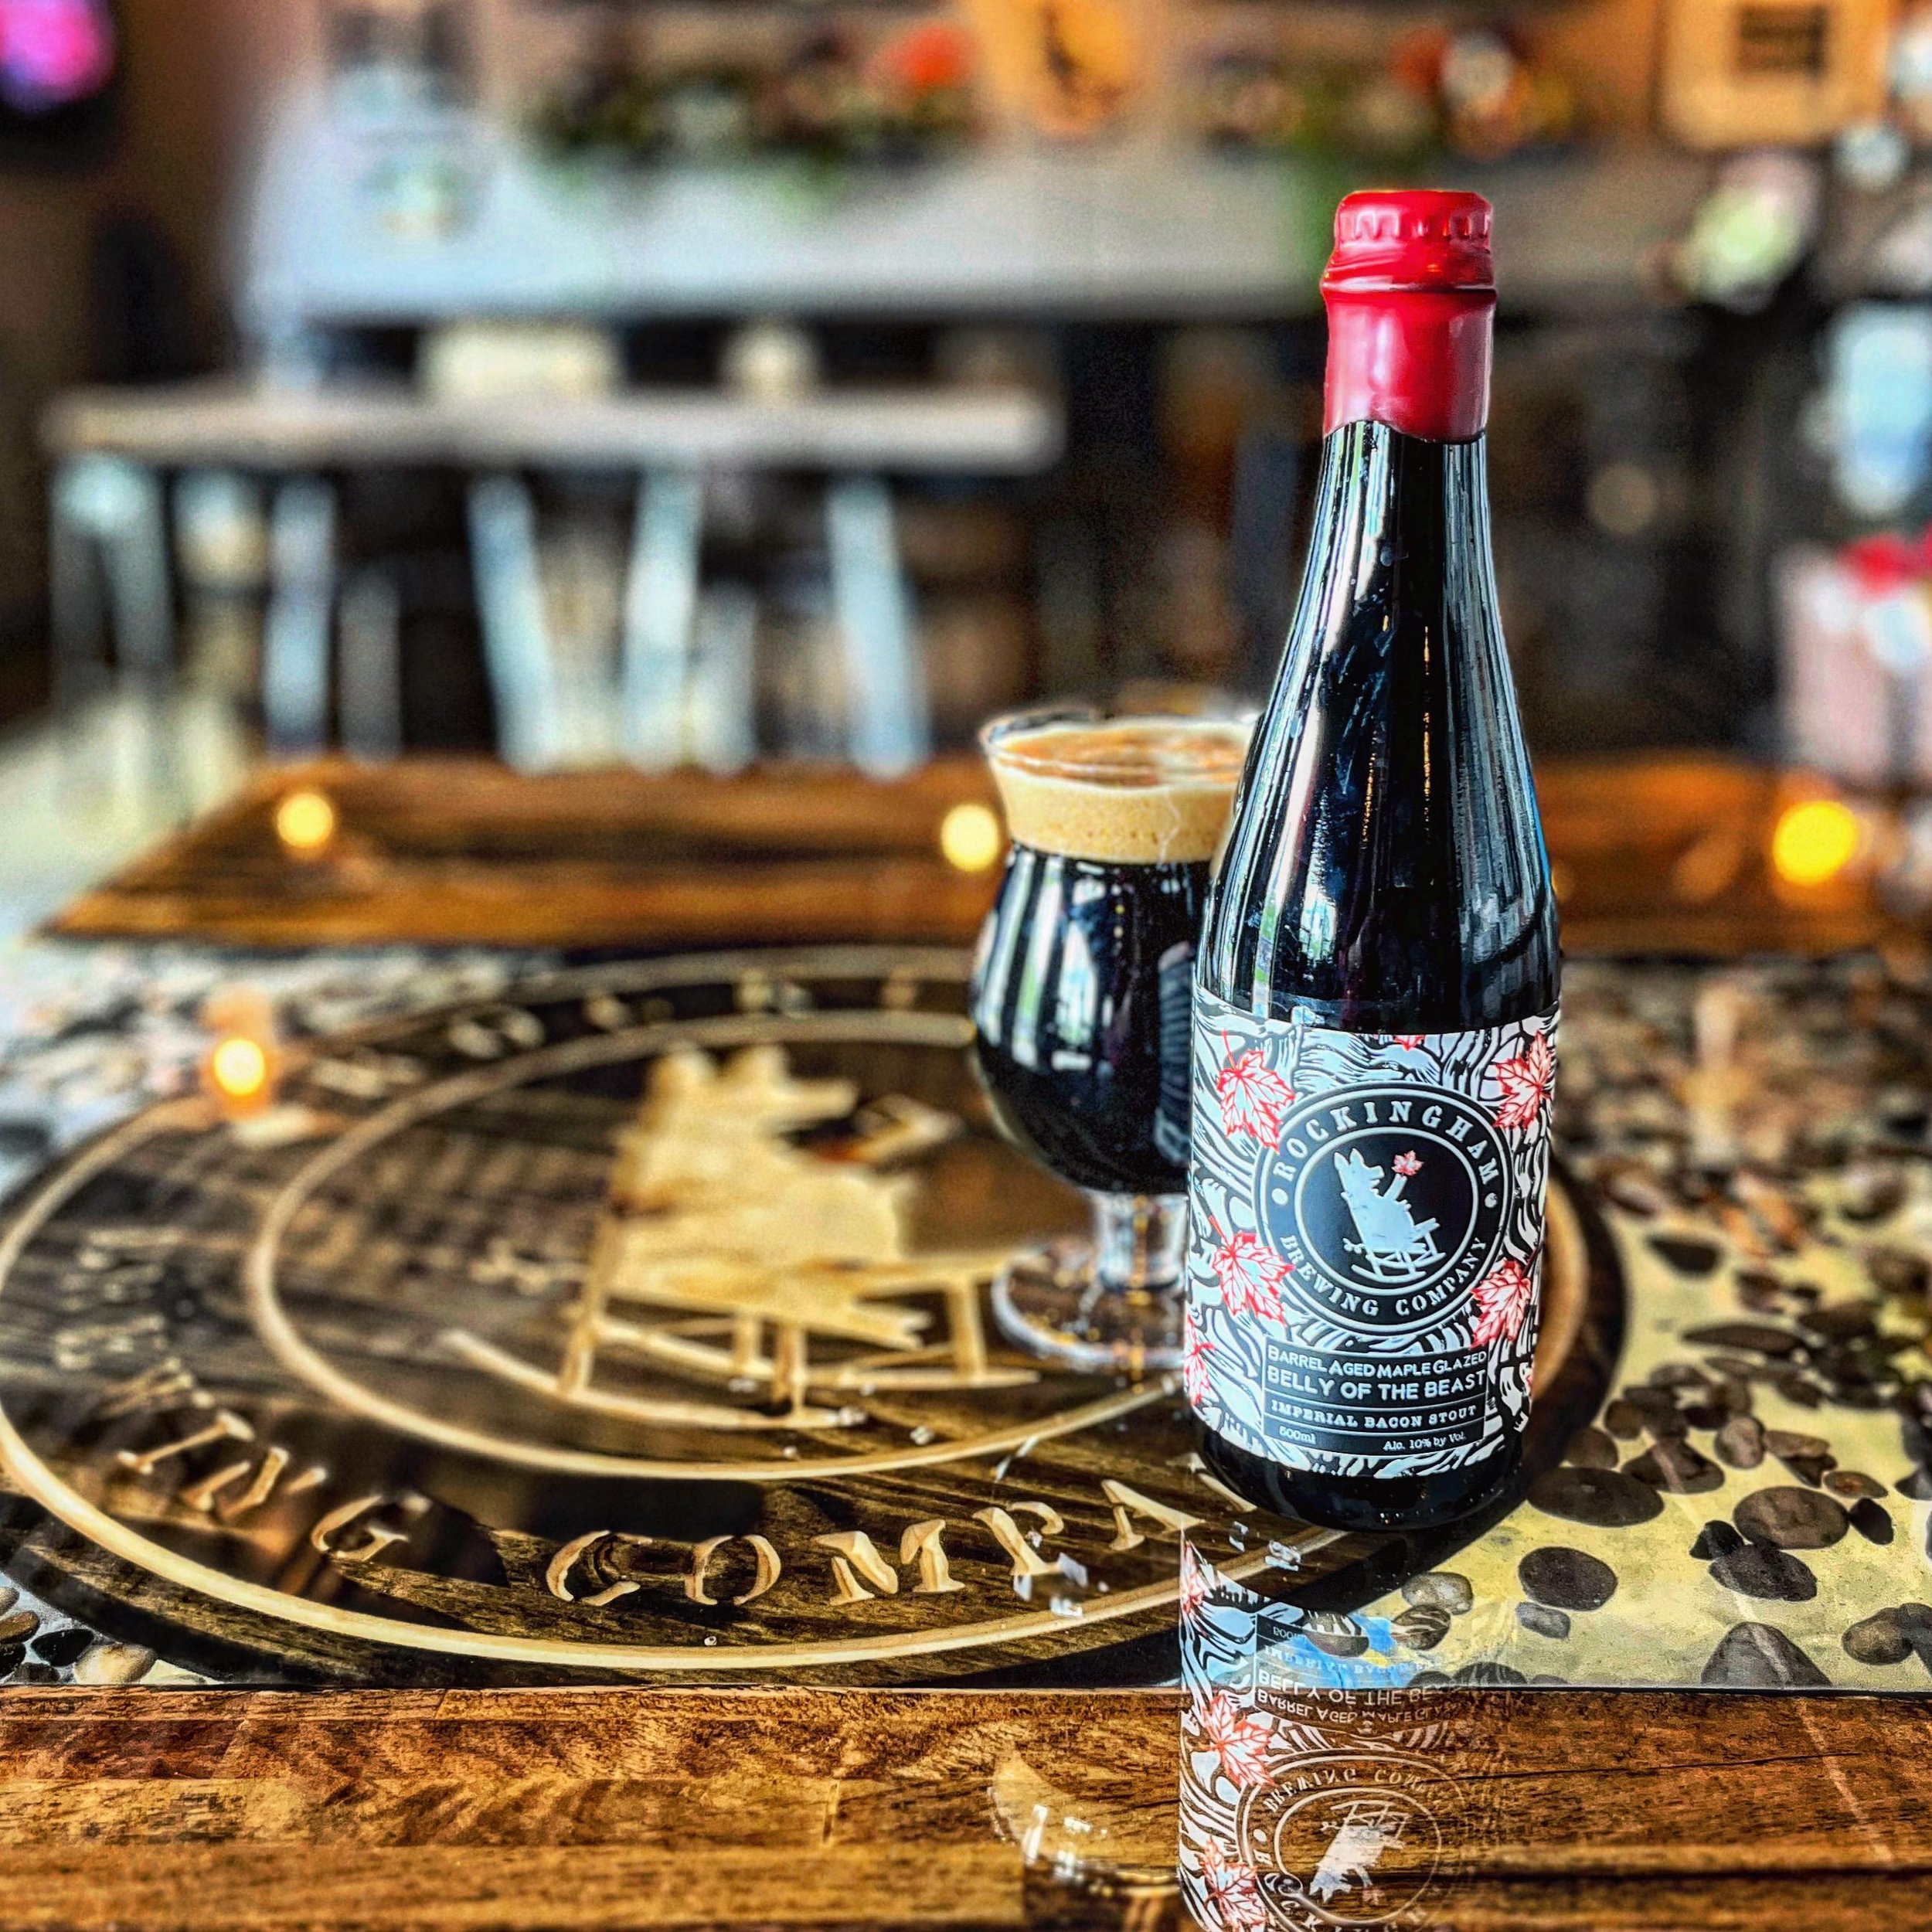 Maple Belly of the Beast is looking twice as nice on our shiny new table! 😍 Join us for a pint or a flight of 5 years of this beauty on tap this weekend. And stay for an absolutely @vulgardisplayofpoutine! Open 2-8p Sat &amp; 1-6p Sun!